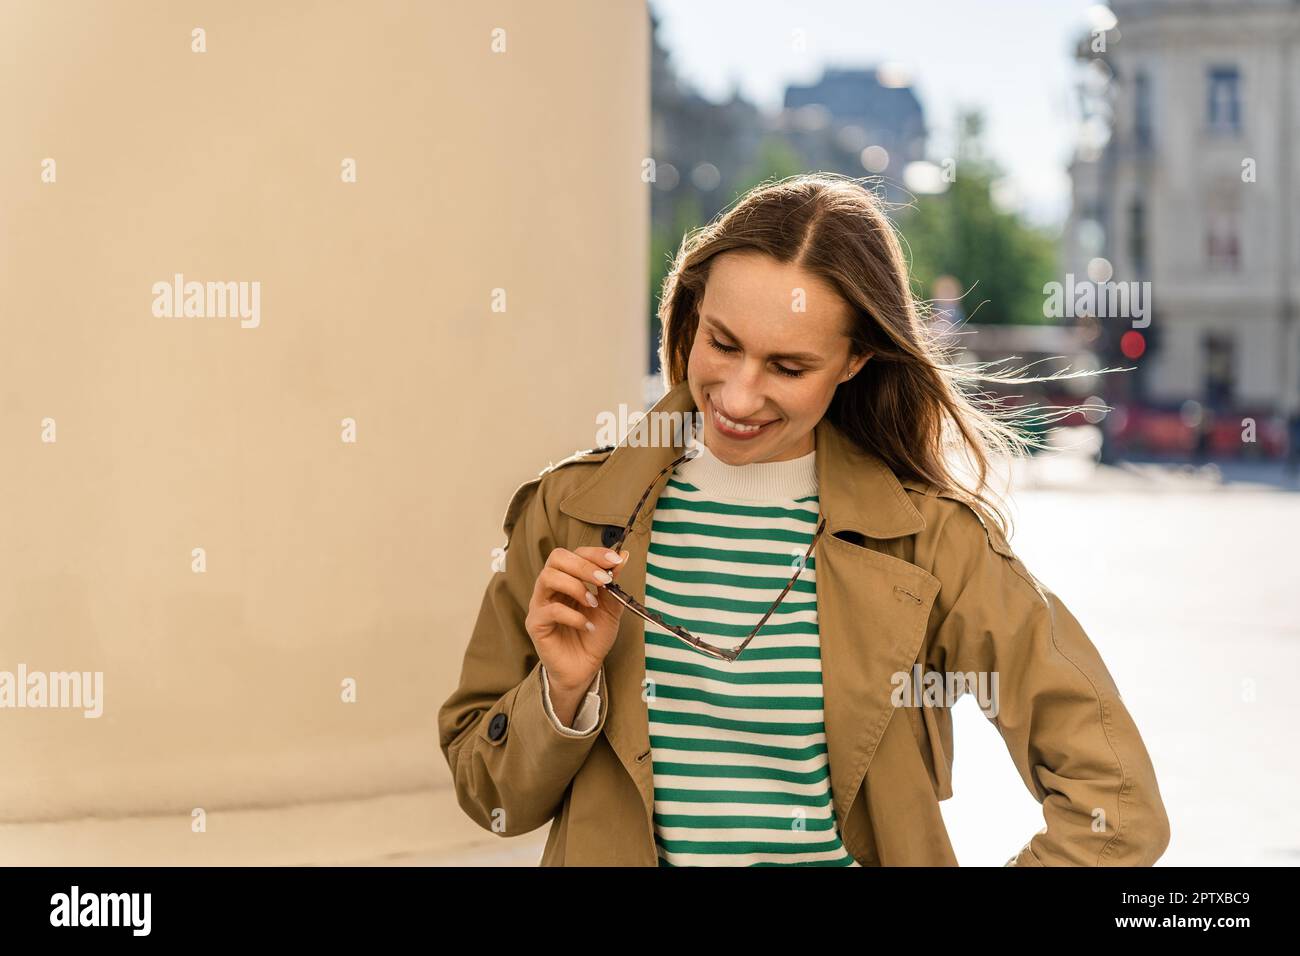 A woman smiles and holds sunglasses while walking in the city Stock Photo